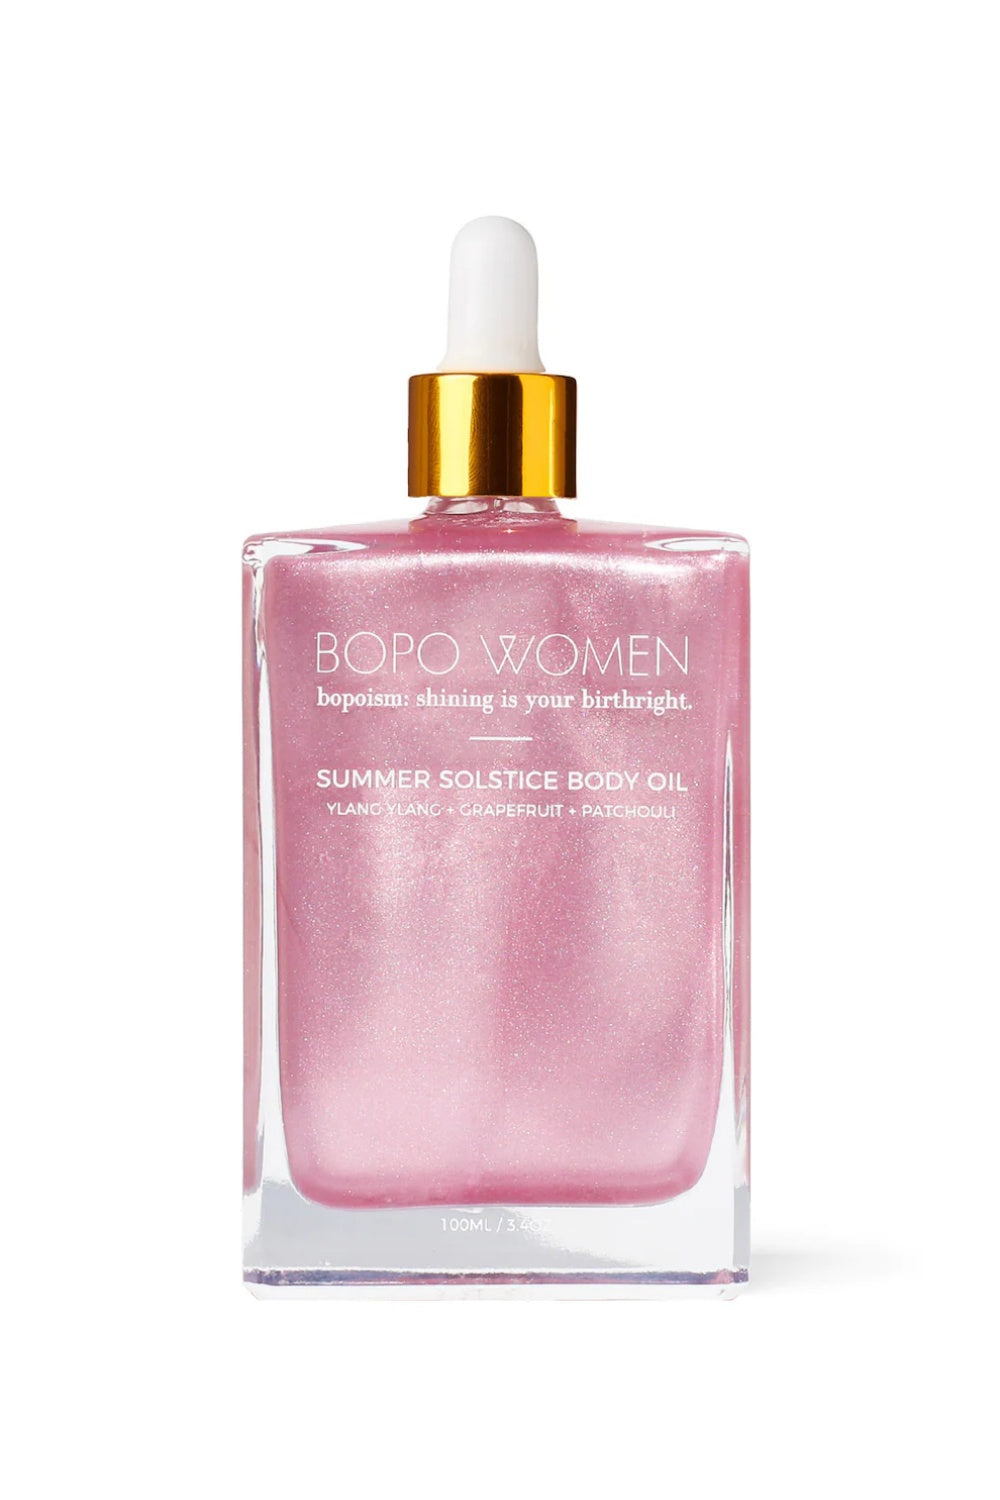 BOPO WOMEN SUMMER SOLSTICE BODY OIL LIMITED EDITION PINK